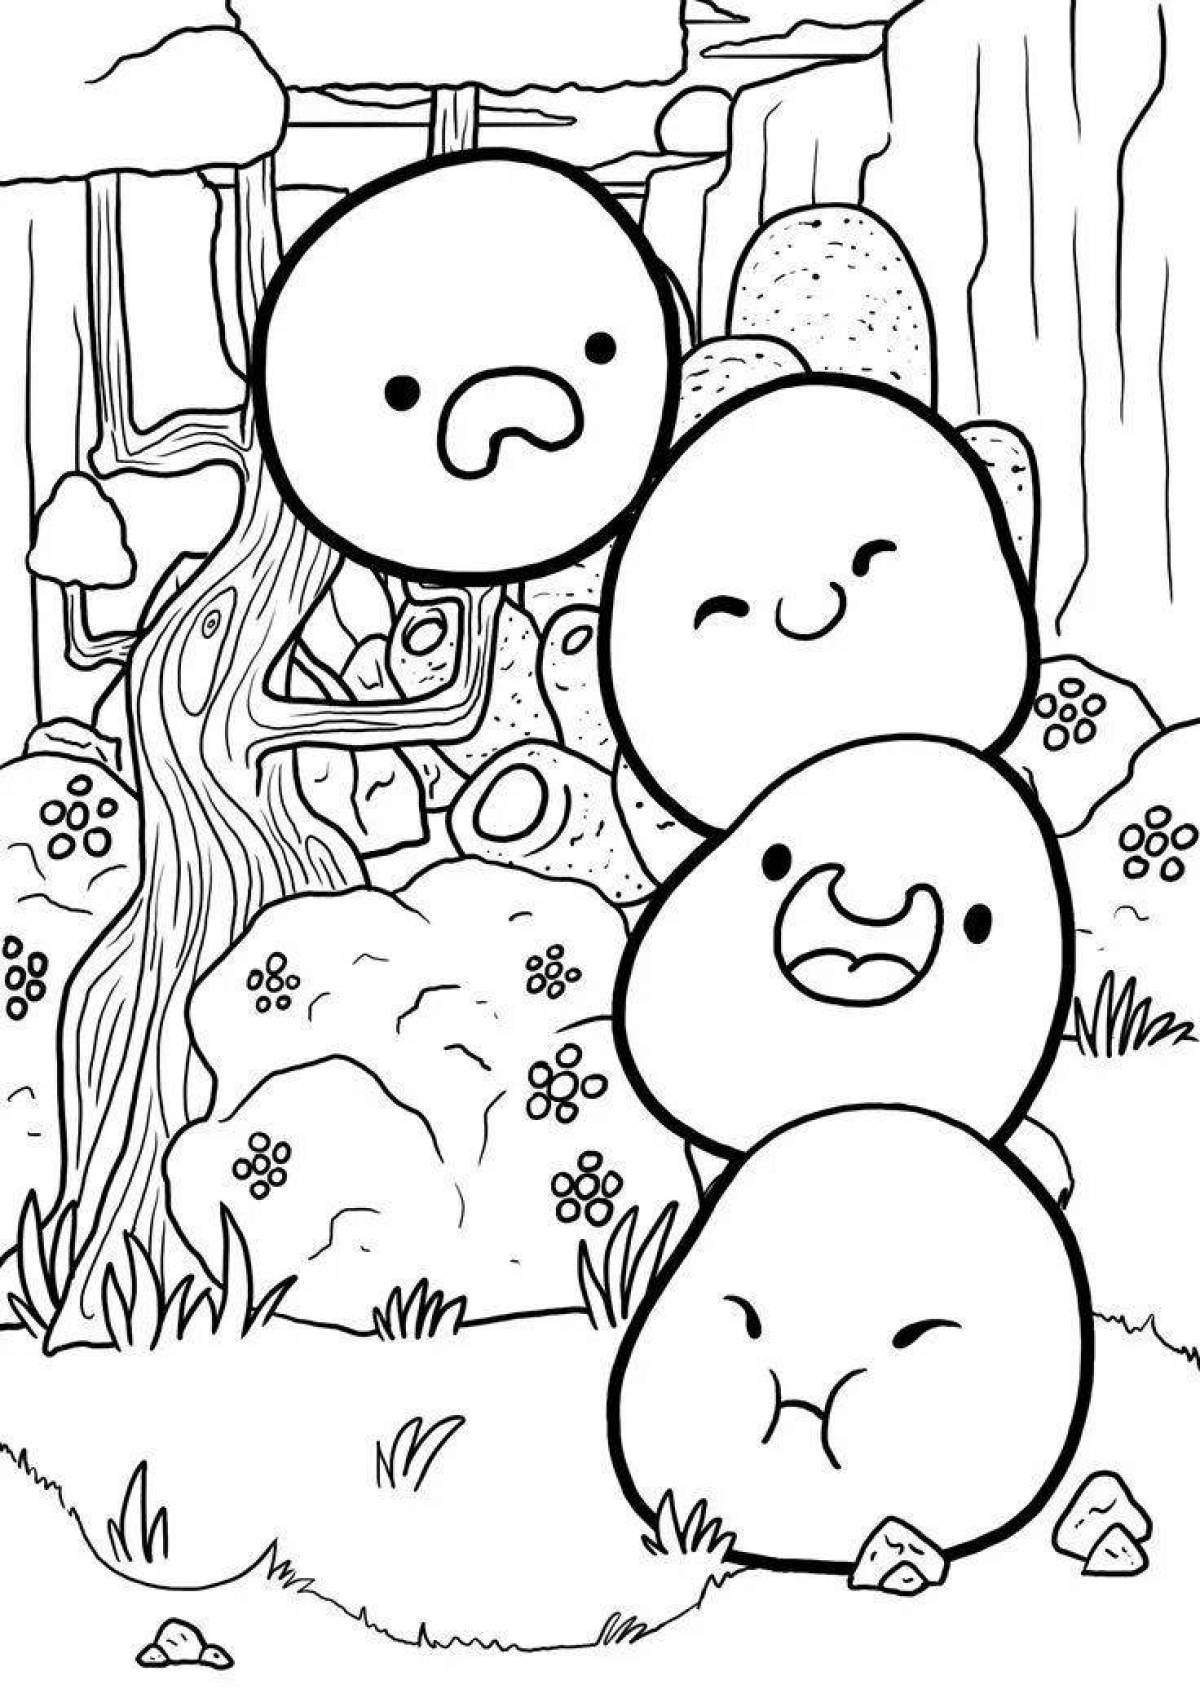 Glitter slime coloring page